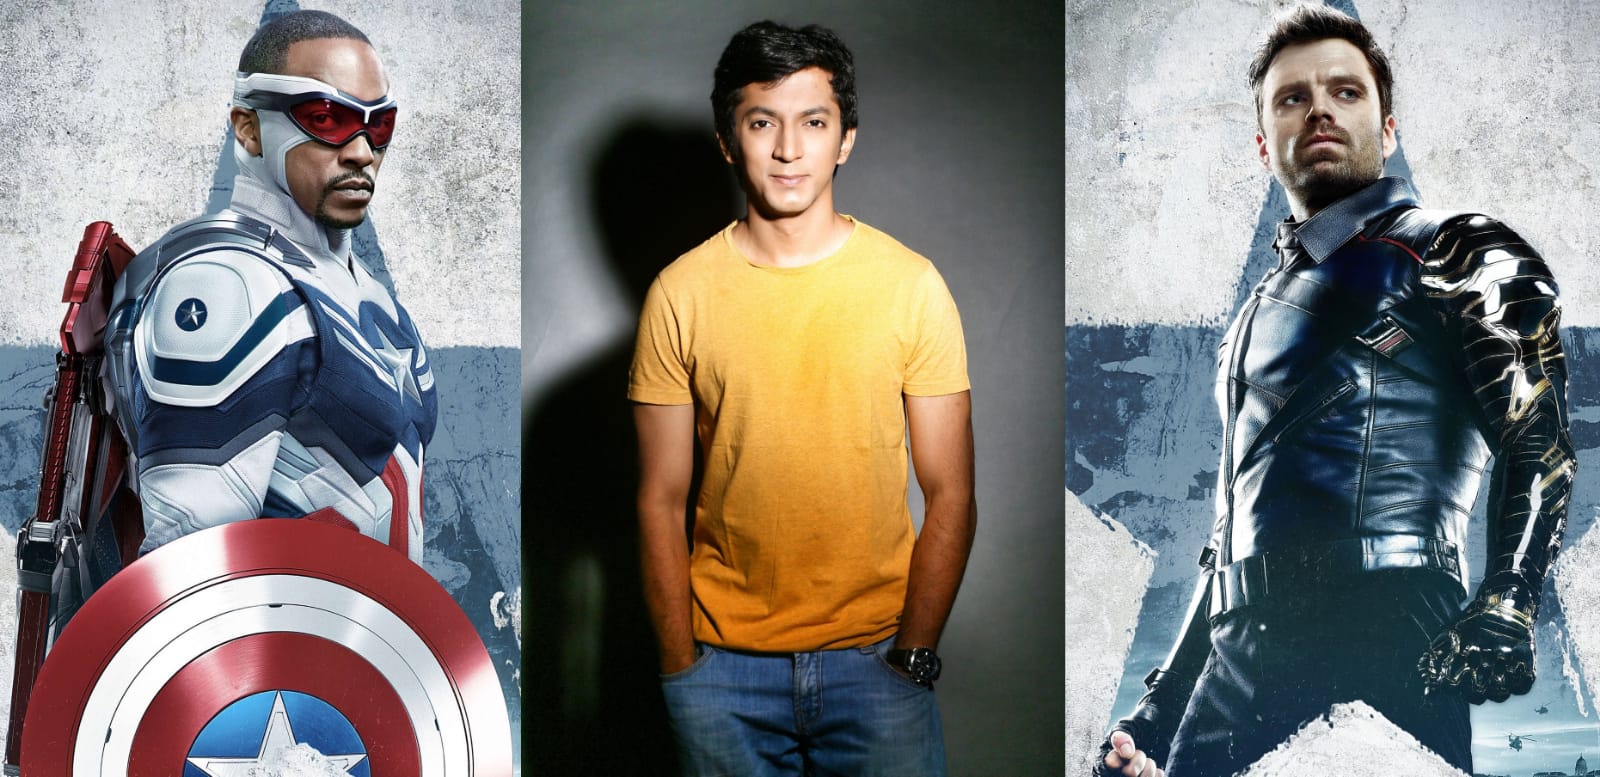 What’s common between Hollywood film Avengers and an Indian actor Anshuman Jha?